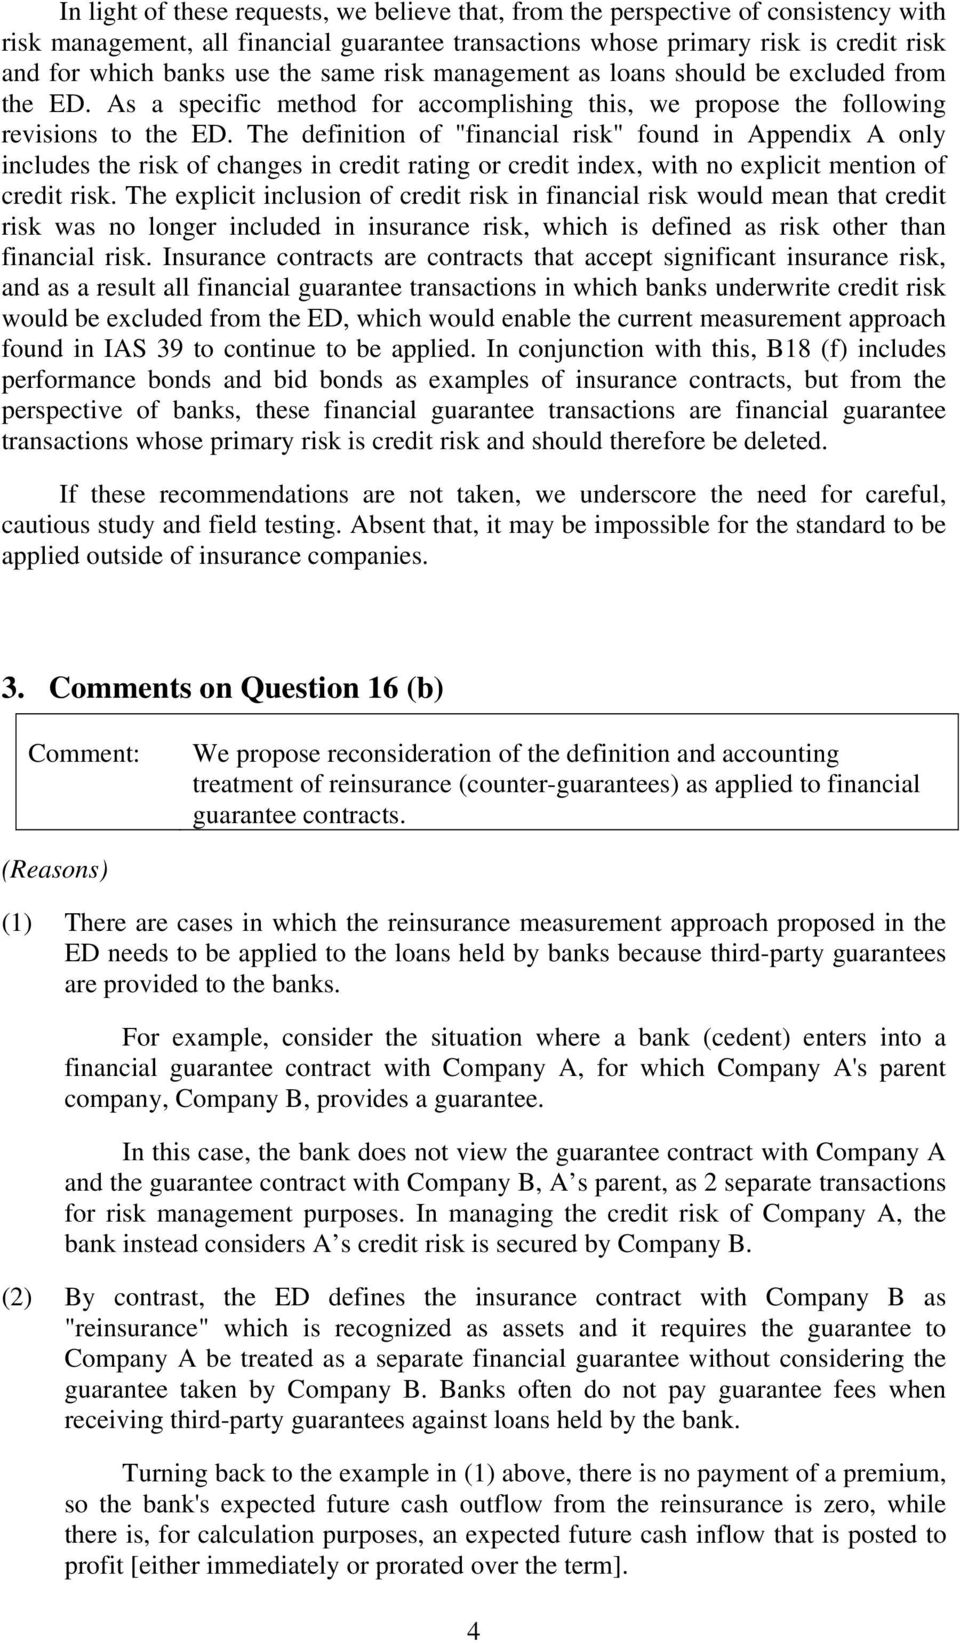 The definition of "financial risk" found in Appendix A only includes the risk of changes in credit rating or credit index, with no explicit mention of credit risk.